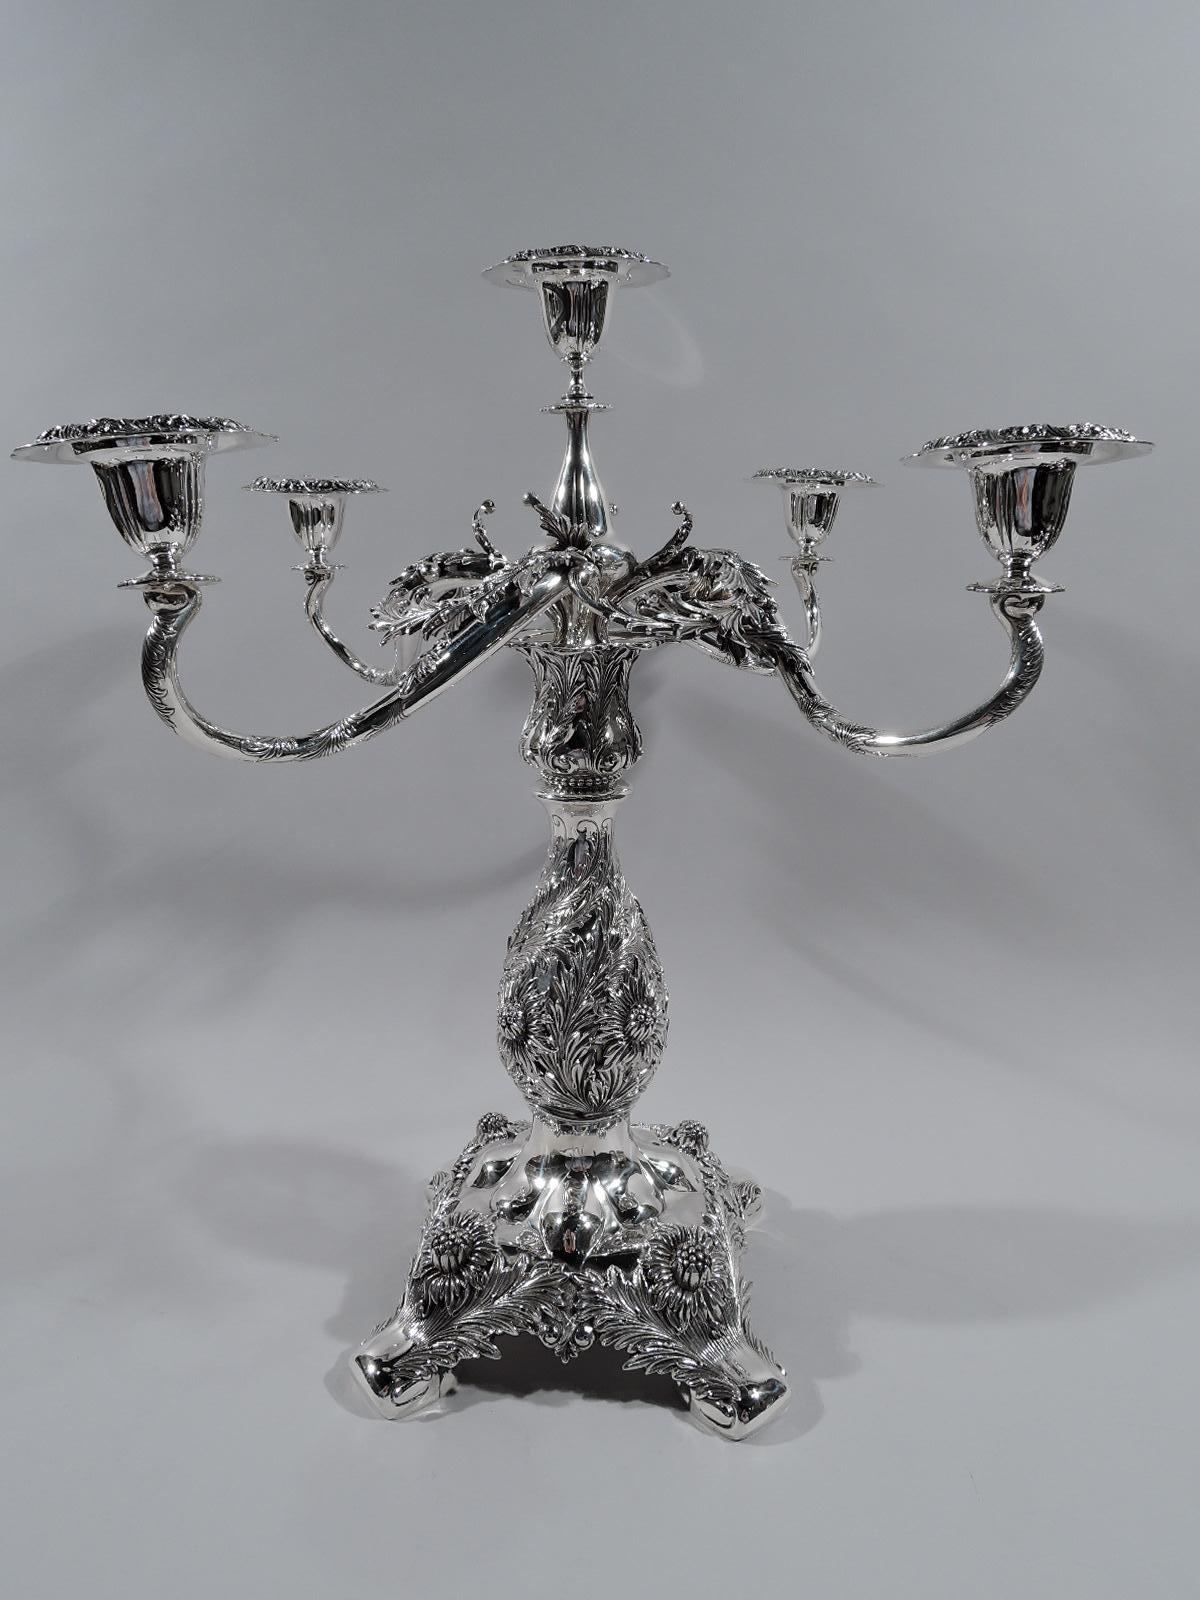 Chrysanthemum sterling silver 5-light centerpiece candelabrum. Sizable baluster shaft on raised squarish foot with corner volute supports. Four scrolled arms, each terminating in single socket, joined by applied leaves and surrounding central raised